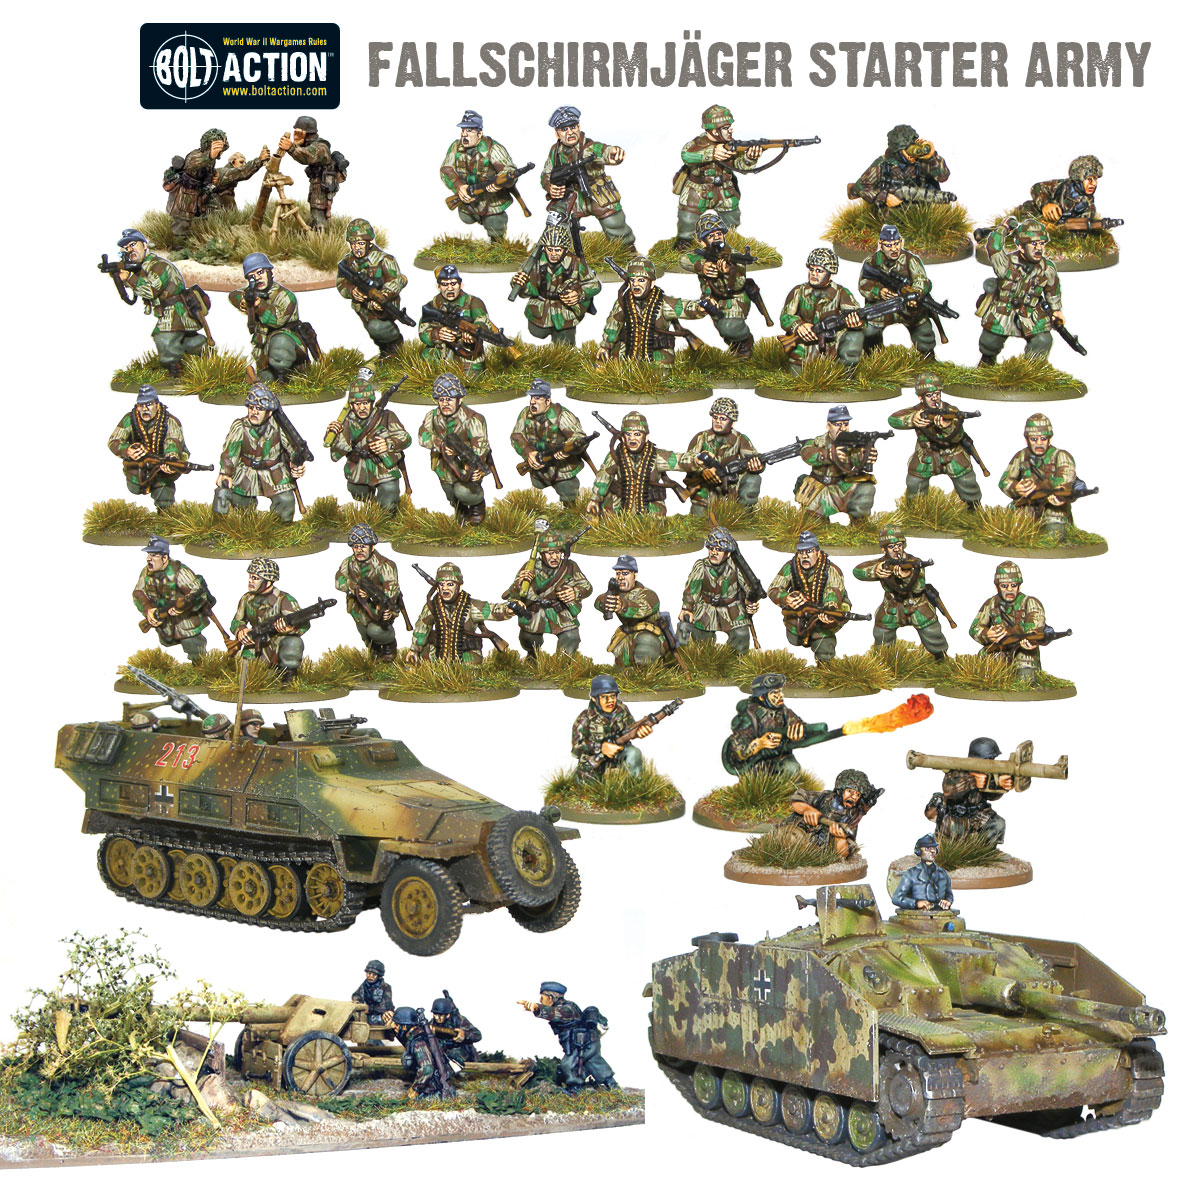 28mm Warlord Games Fallschirmjager Starter Army Bolt Action Ww2 for sale online 